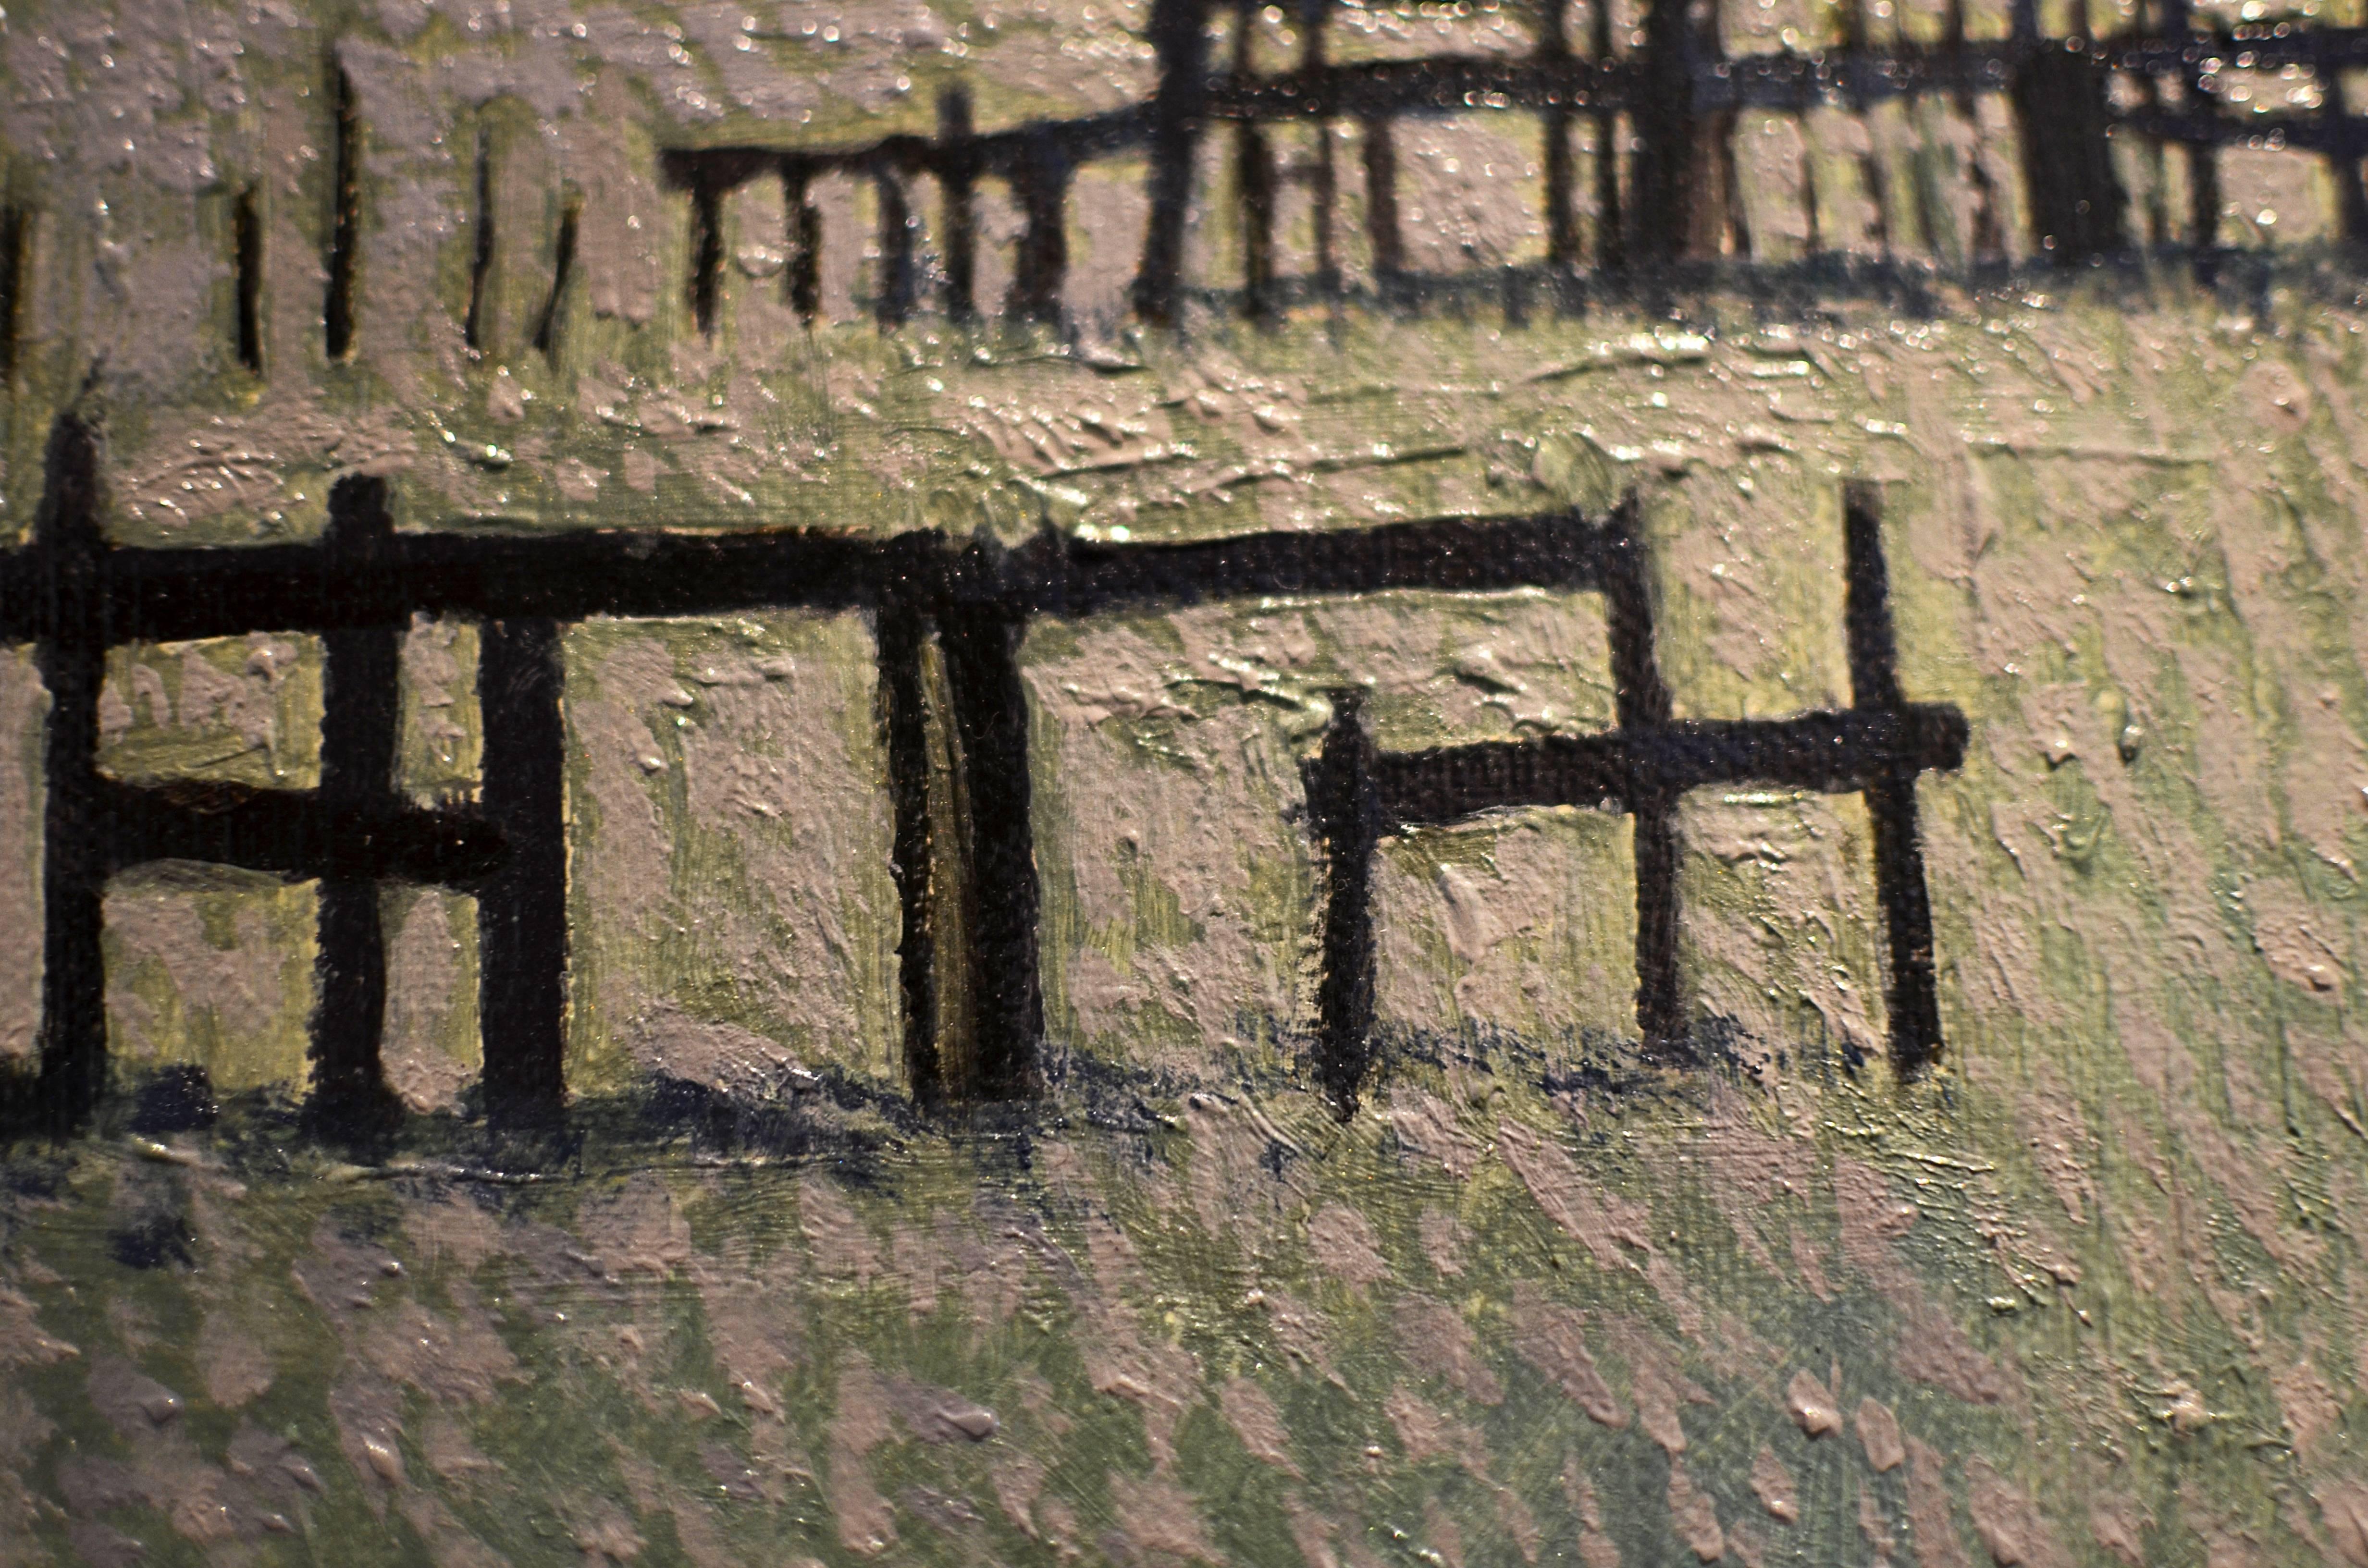 Fences, oil paint on linen - Gray Figurative Painting by XAVIER RODÉS